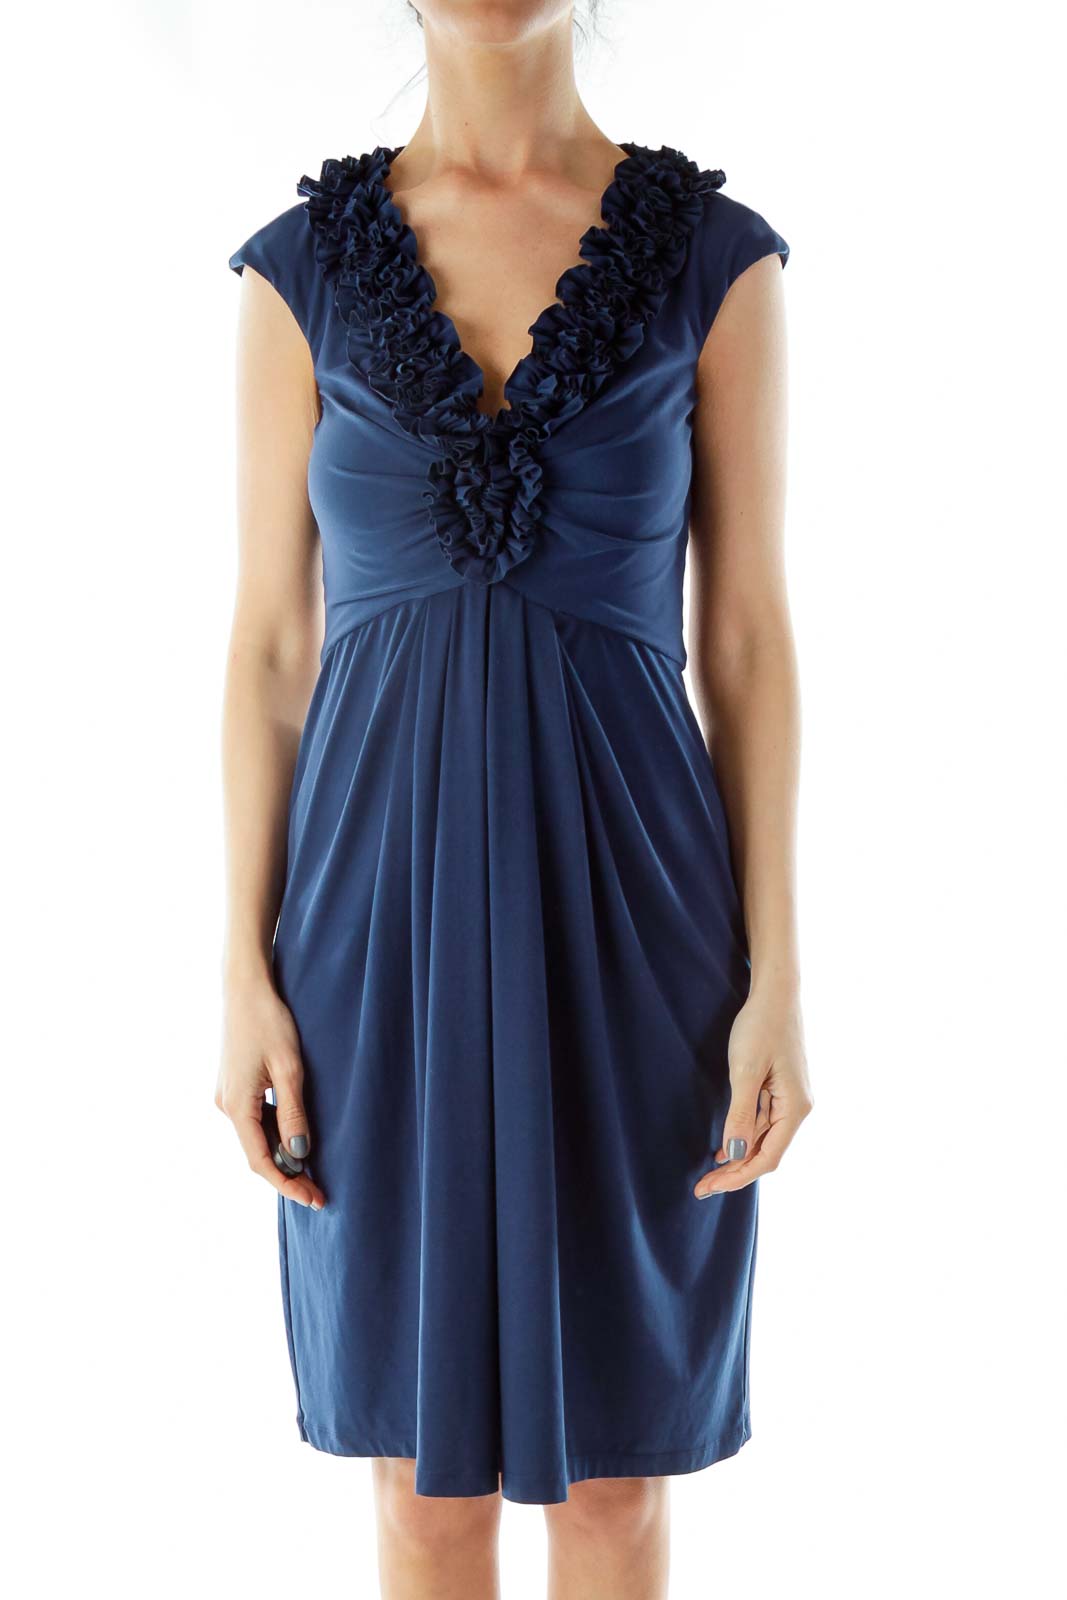 Blue Ruffled A-Line Cocktail Dress Front